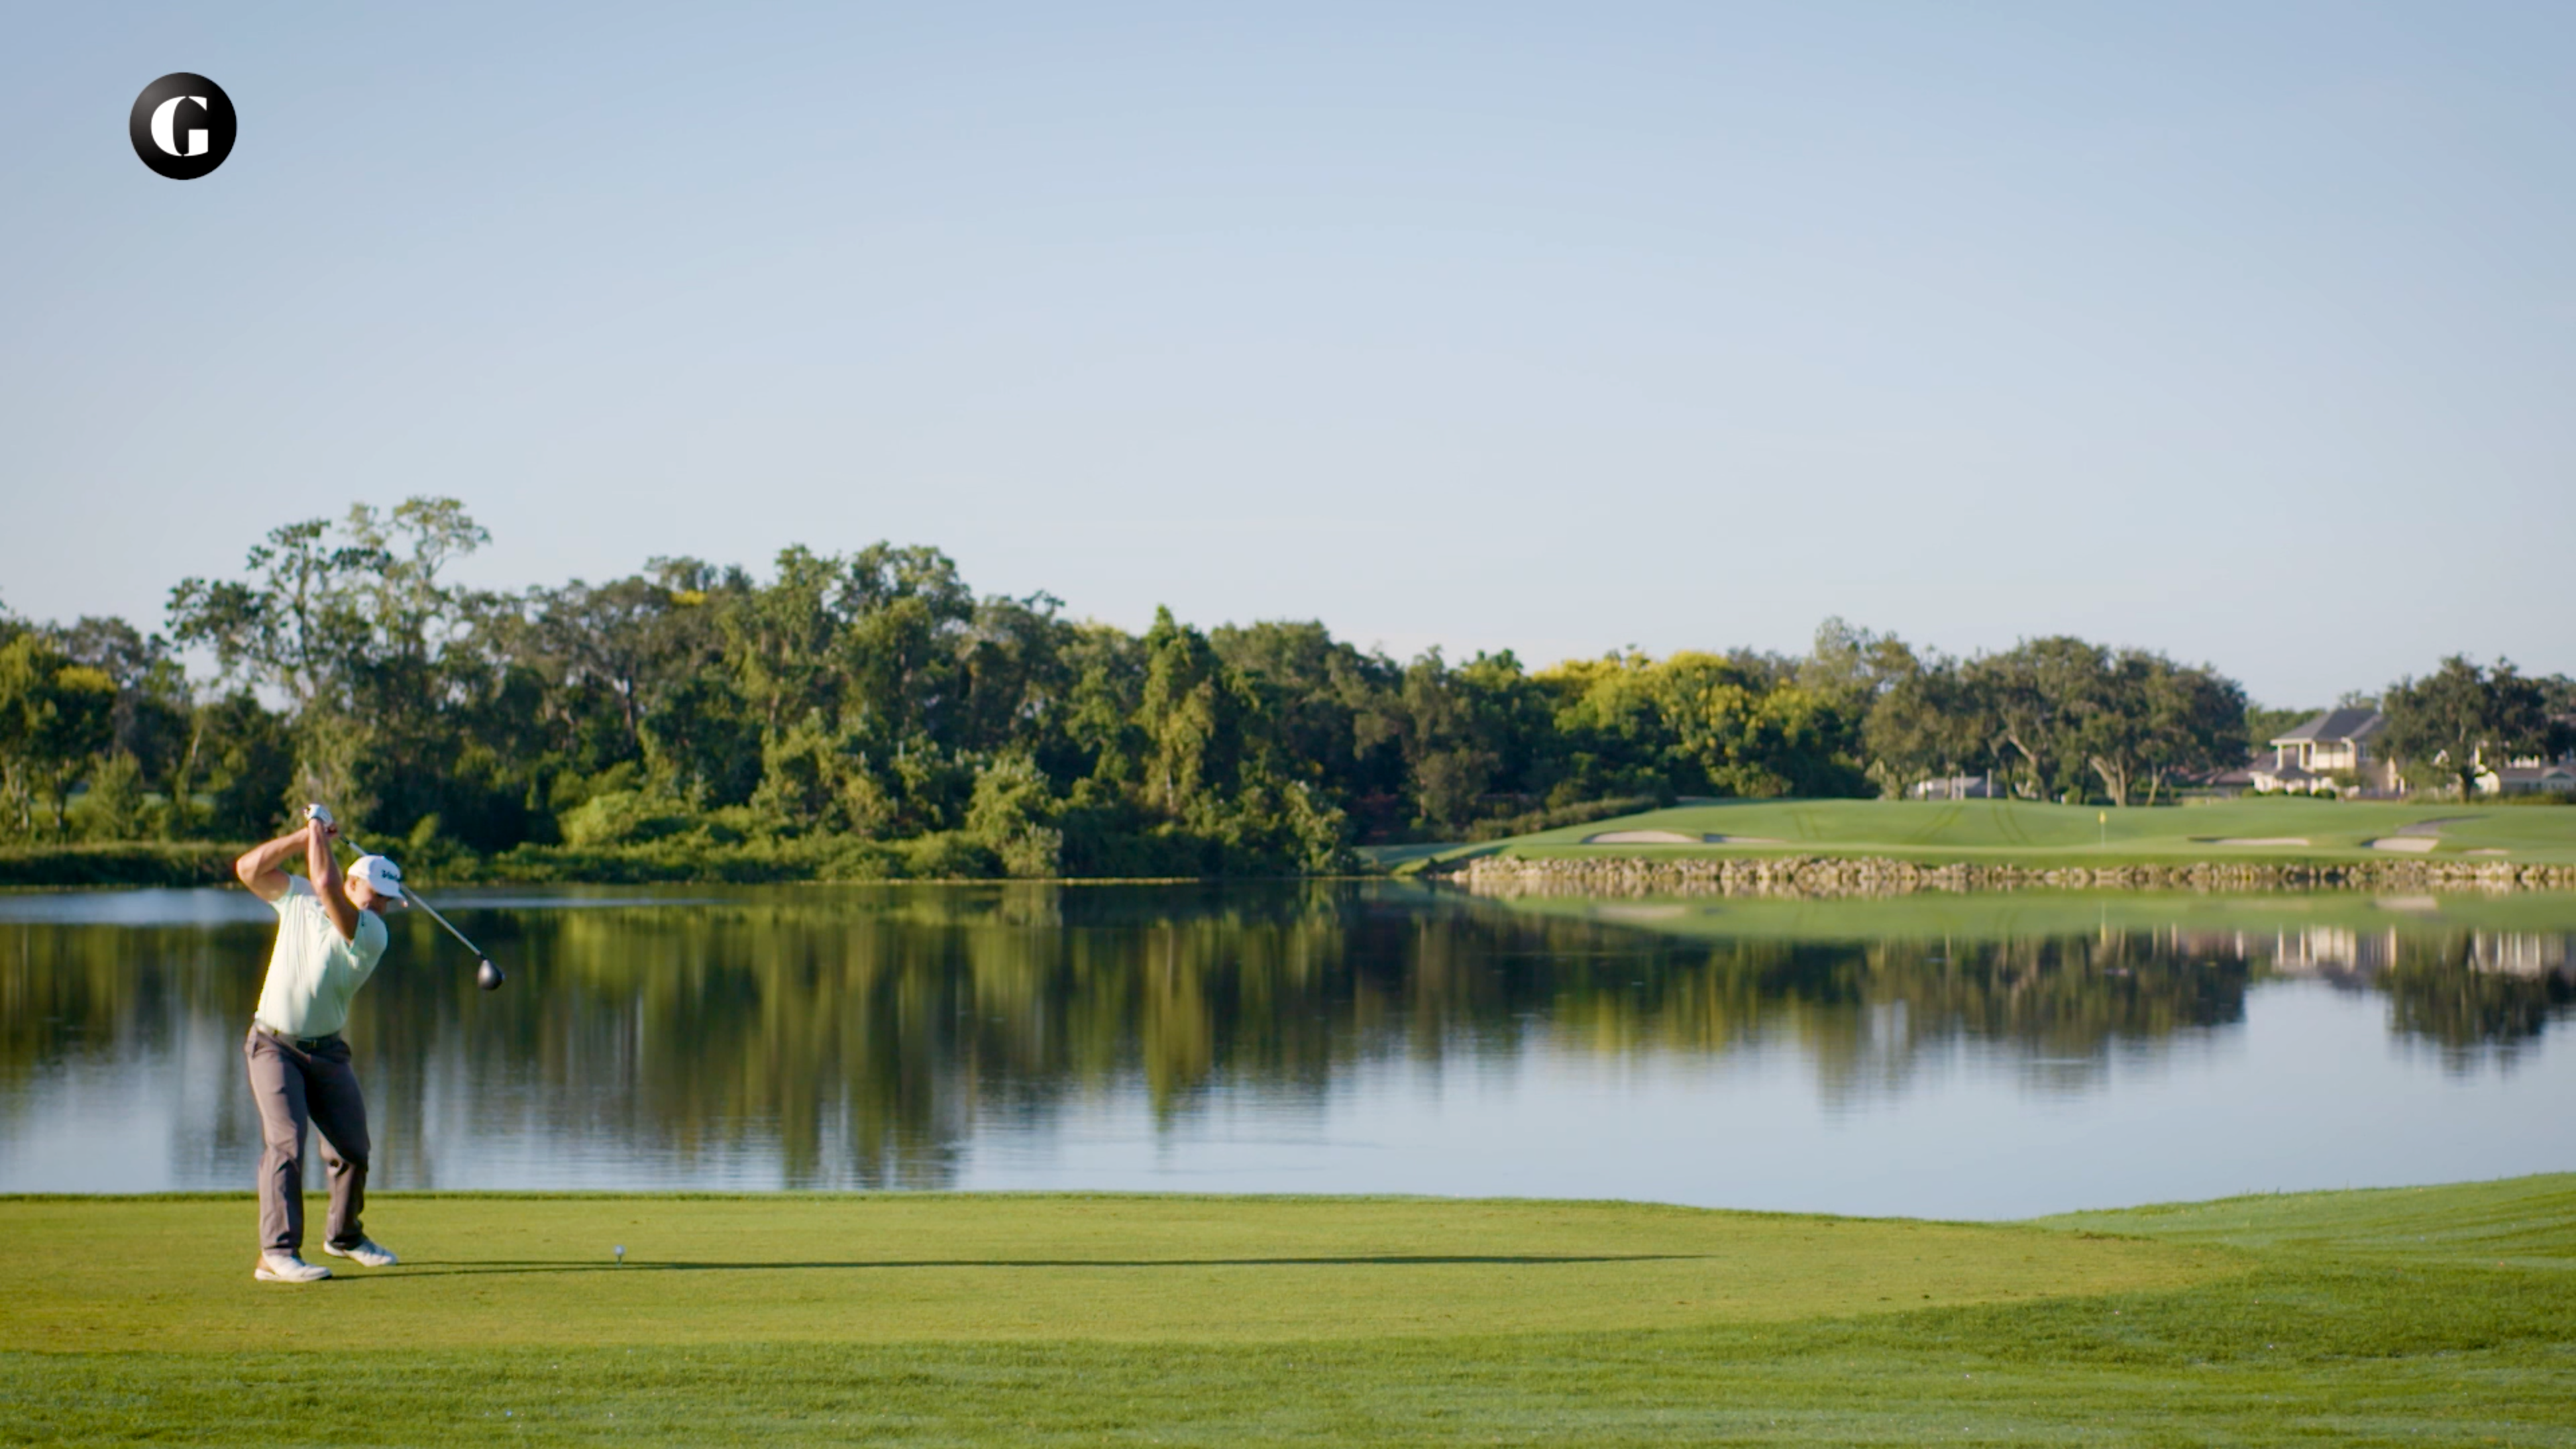 We had a long-drive champion try to drive the 555-yard sixth hole